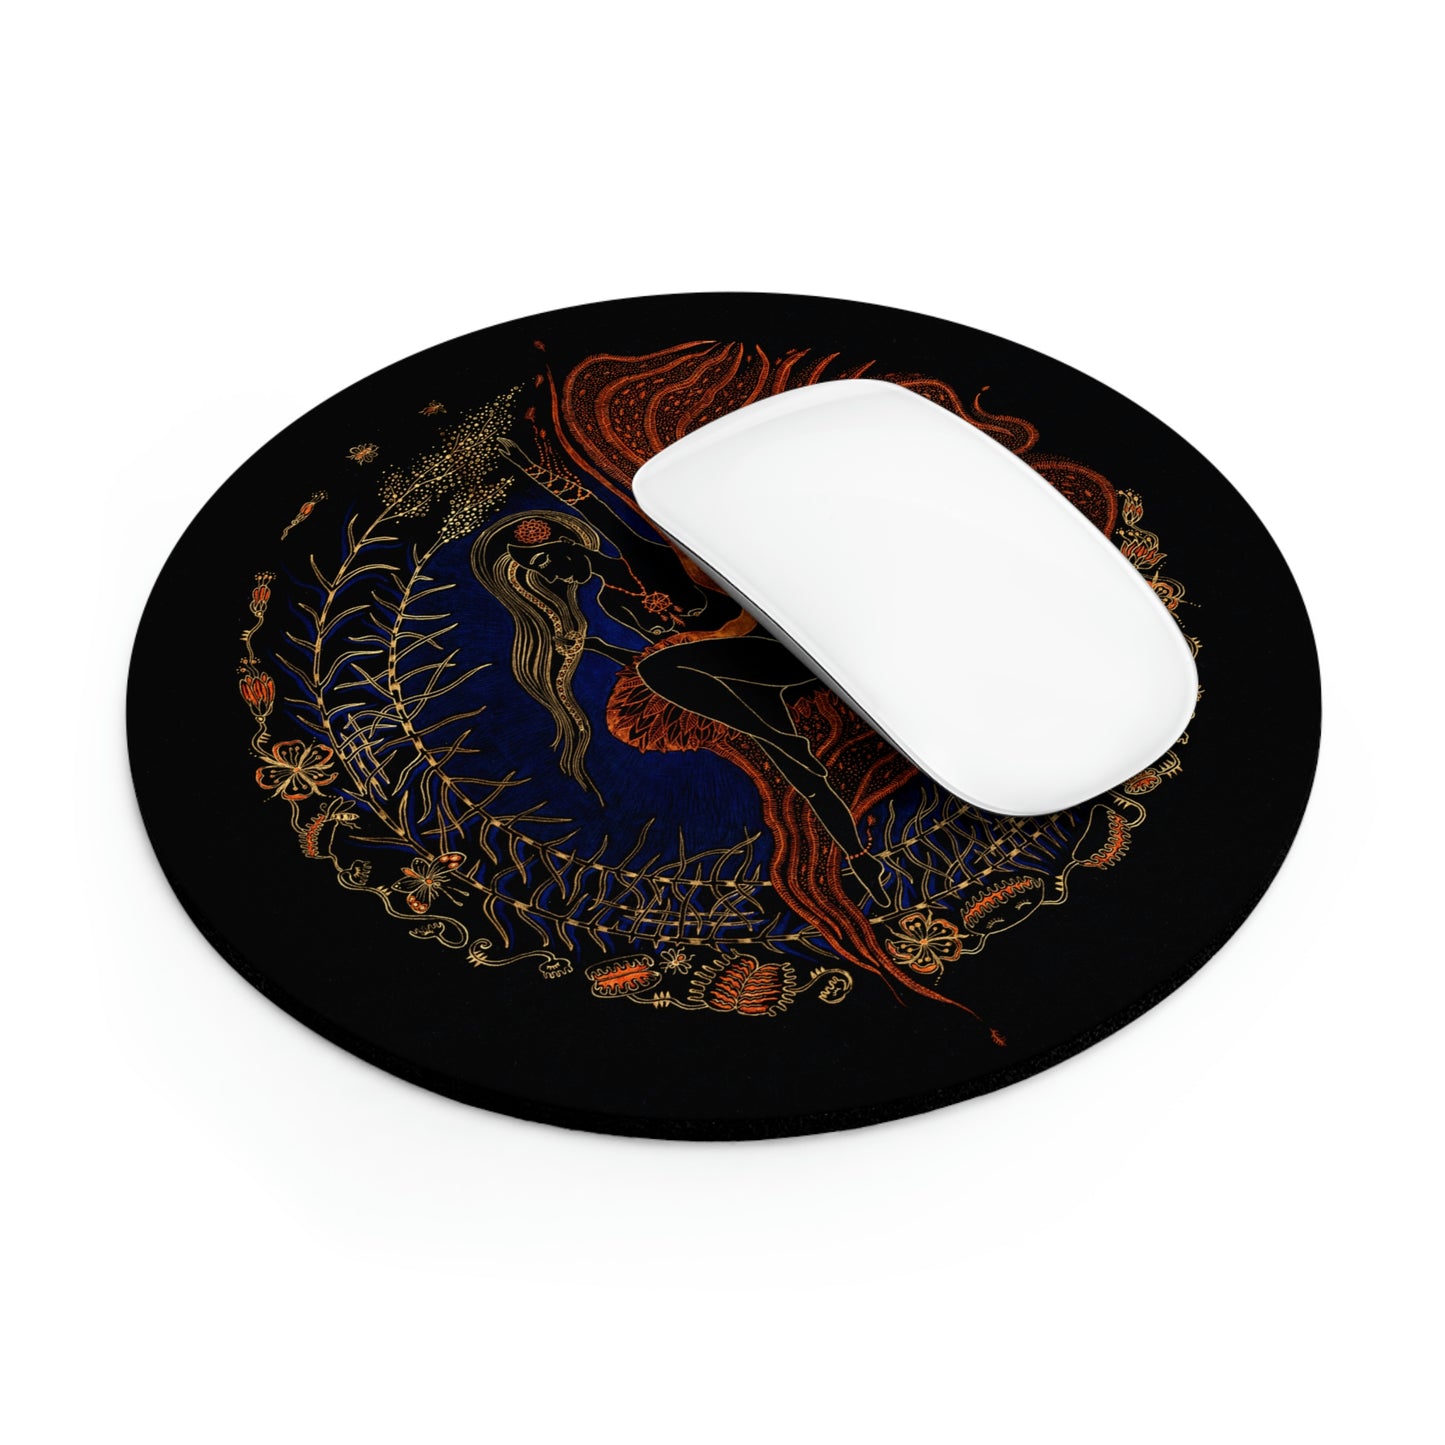 Chinese Zodiac Sign Mouse Pad (Rooster)